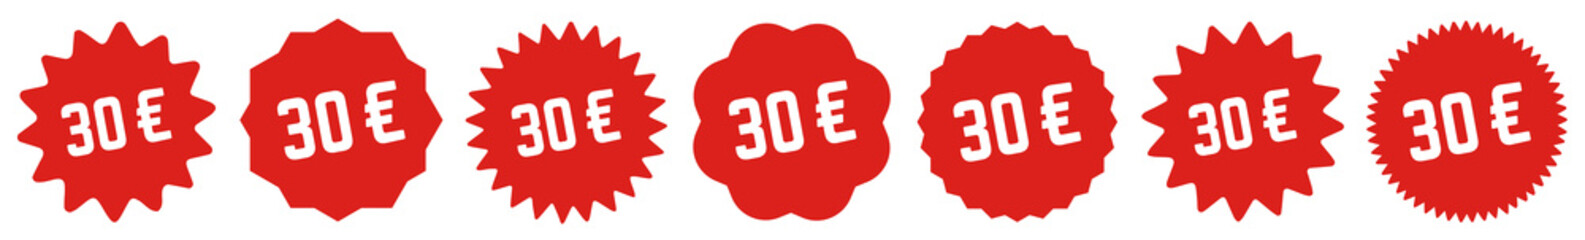 30 Price Tag Red | 30 Euro | Special Offer Icon | Sale Sticker | Deal Label | Variations